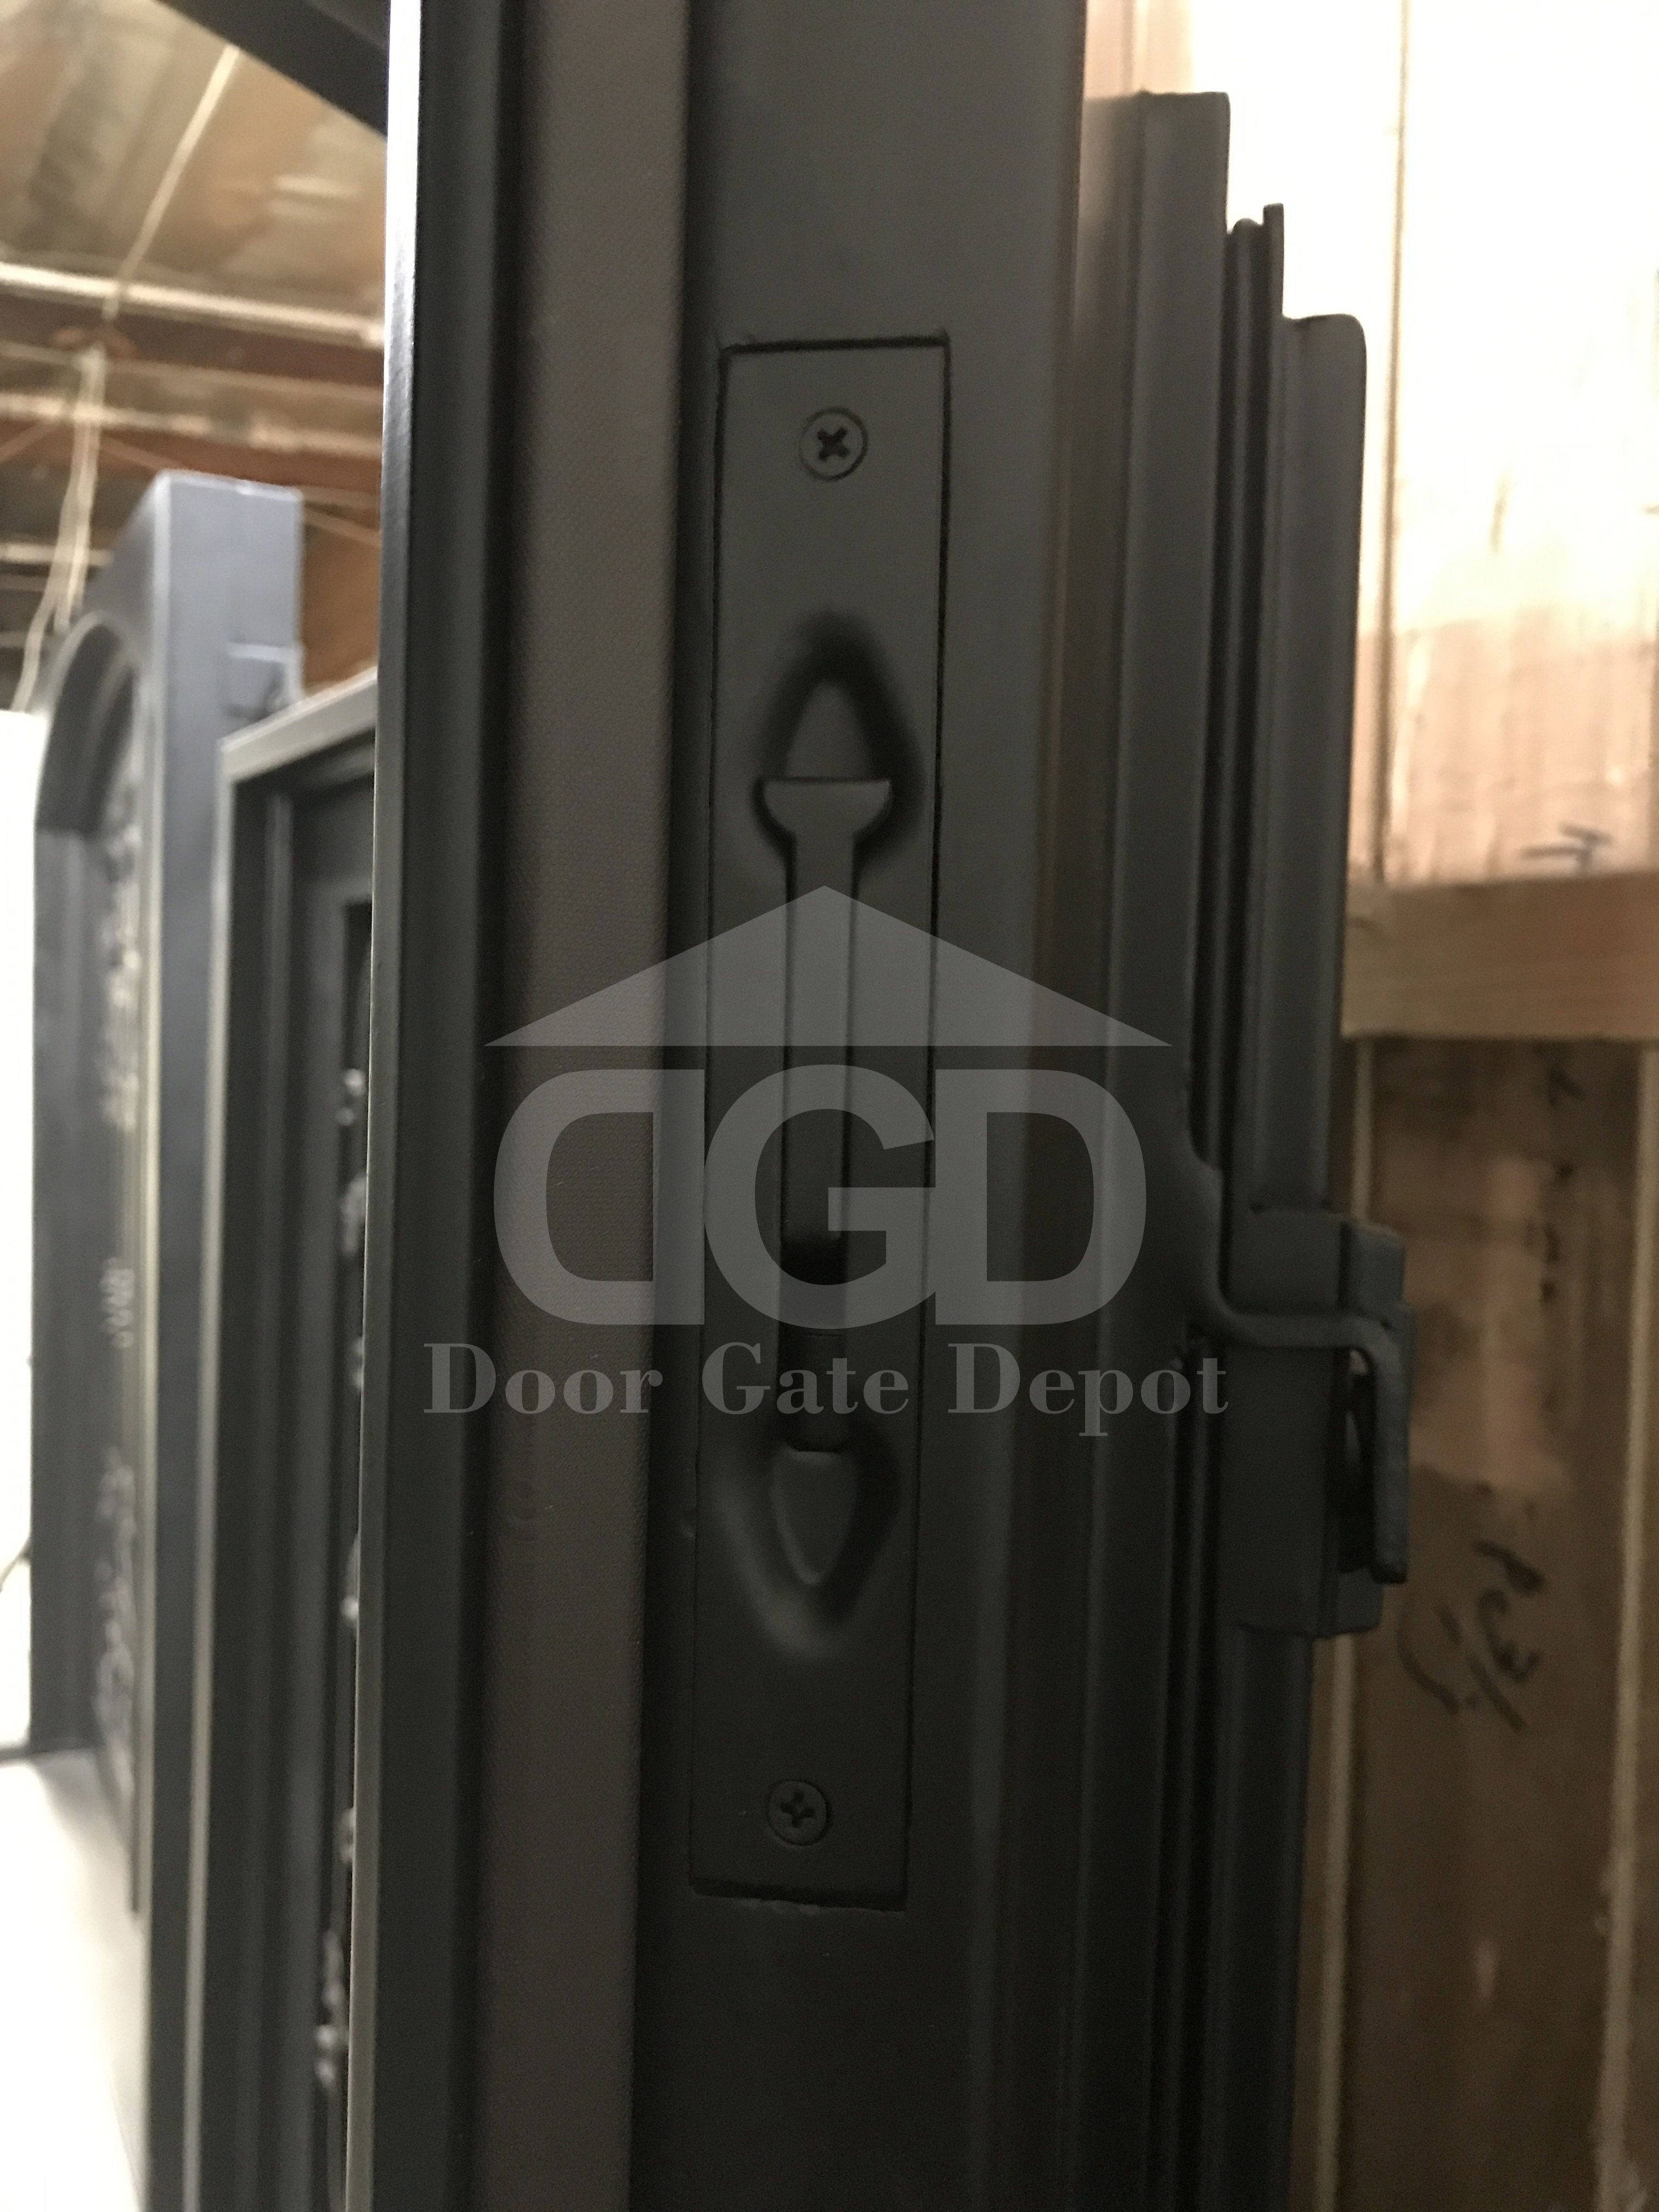 ORCHID- Straight Top, Double Pane Tempered Insulated Glass, Bug Screens, Wrought Iron Doors-61x81 Right Hand - Door Gate Depot